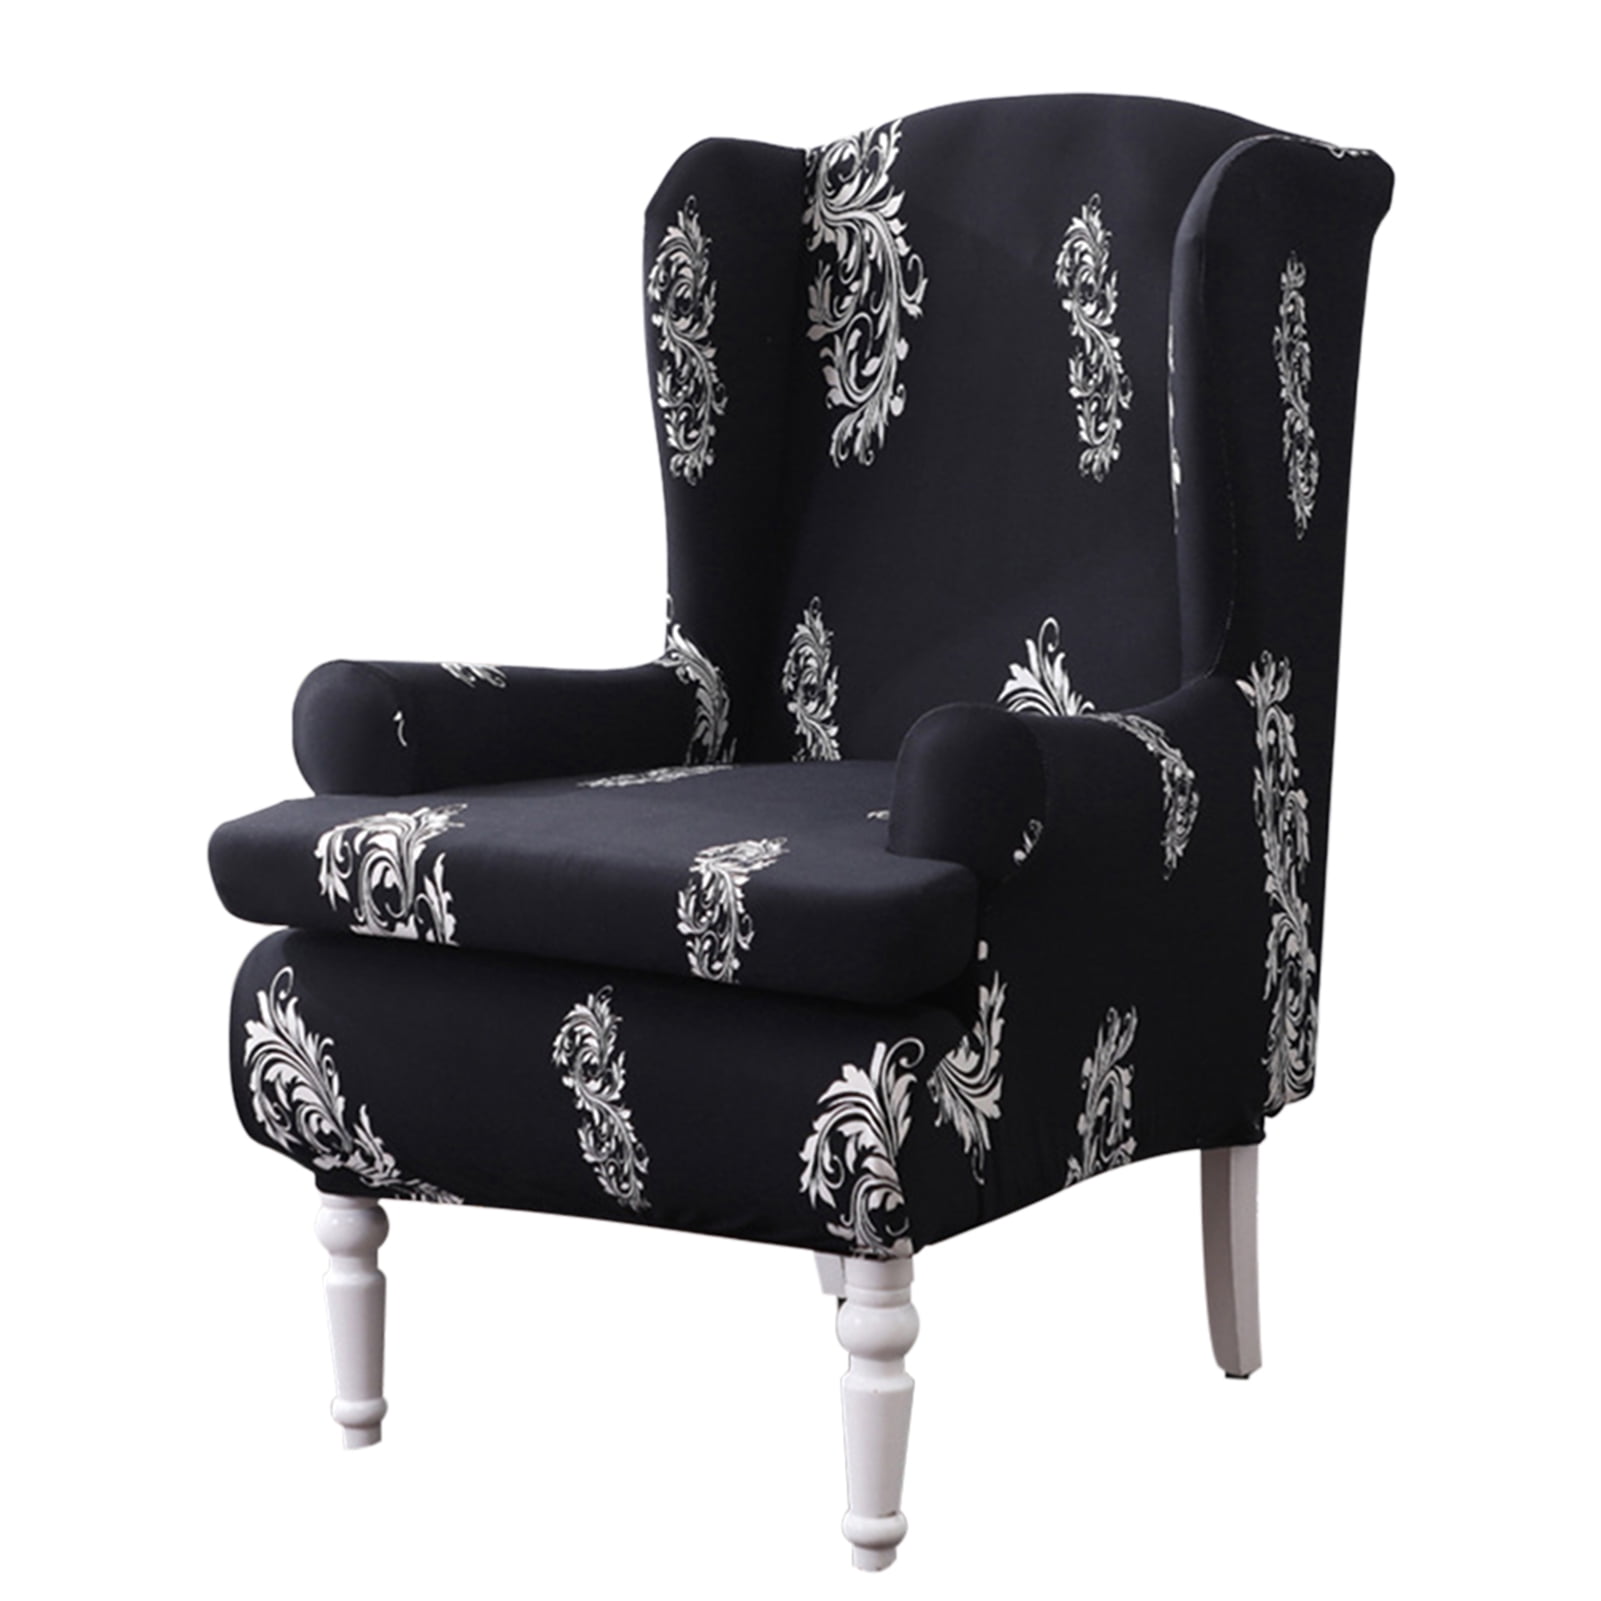 Details about   Stretch Wing Back Arm Chair Covers Wingback Sofa Printed Slipcover Protector NEW